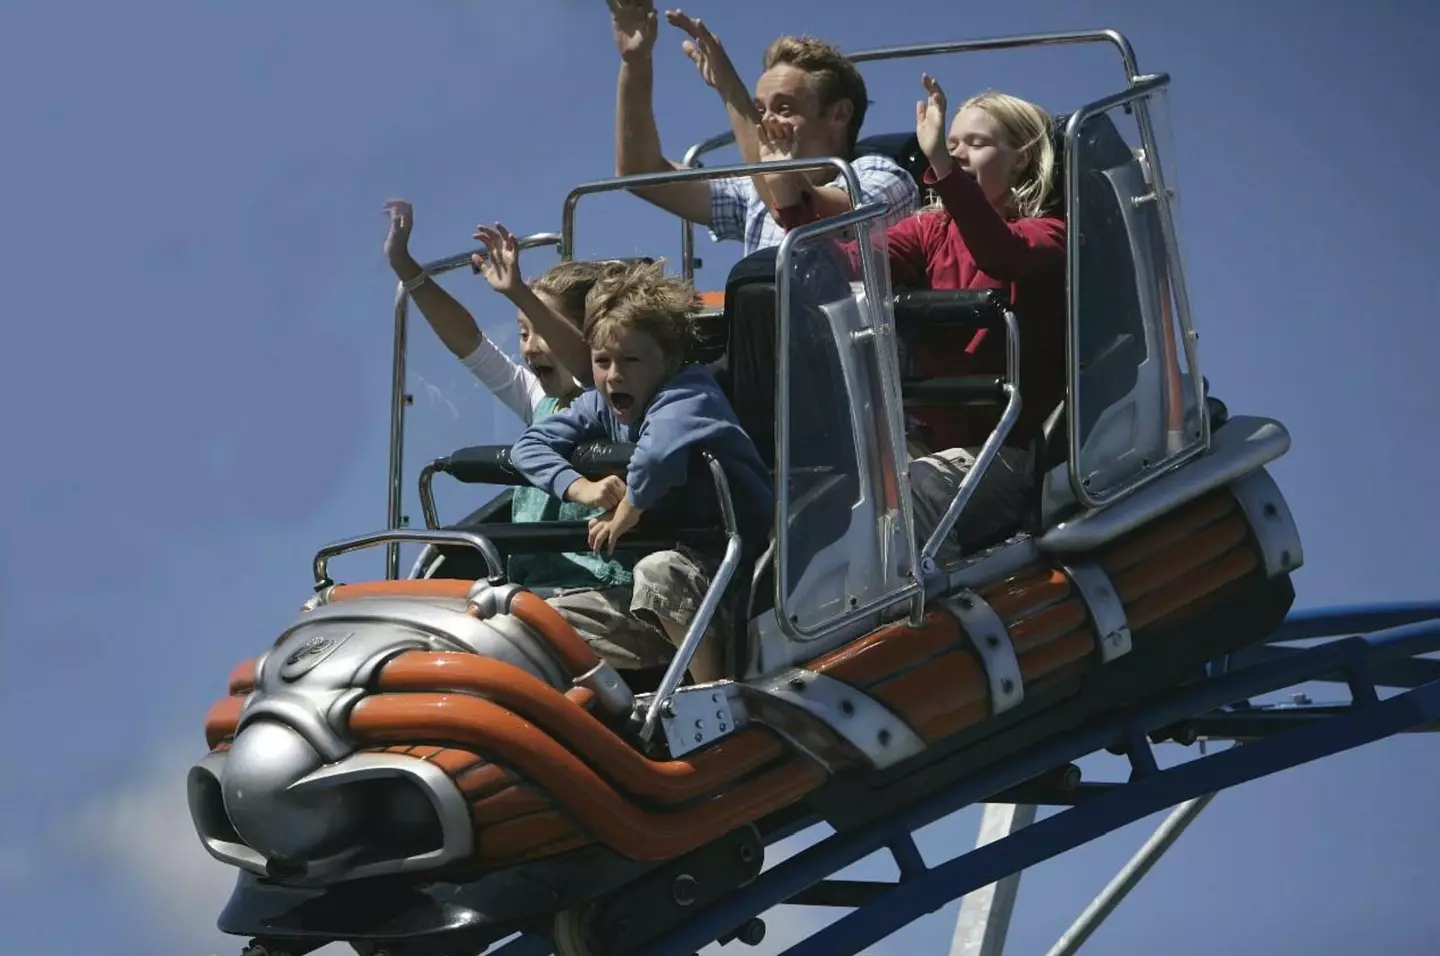 The theme park has been rated as one of the top five in the world on TripAdvisor.